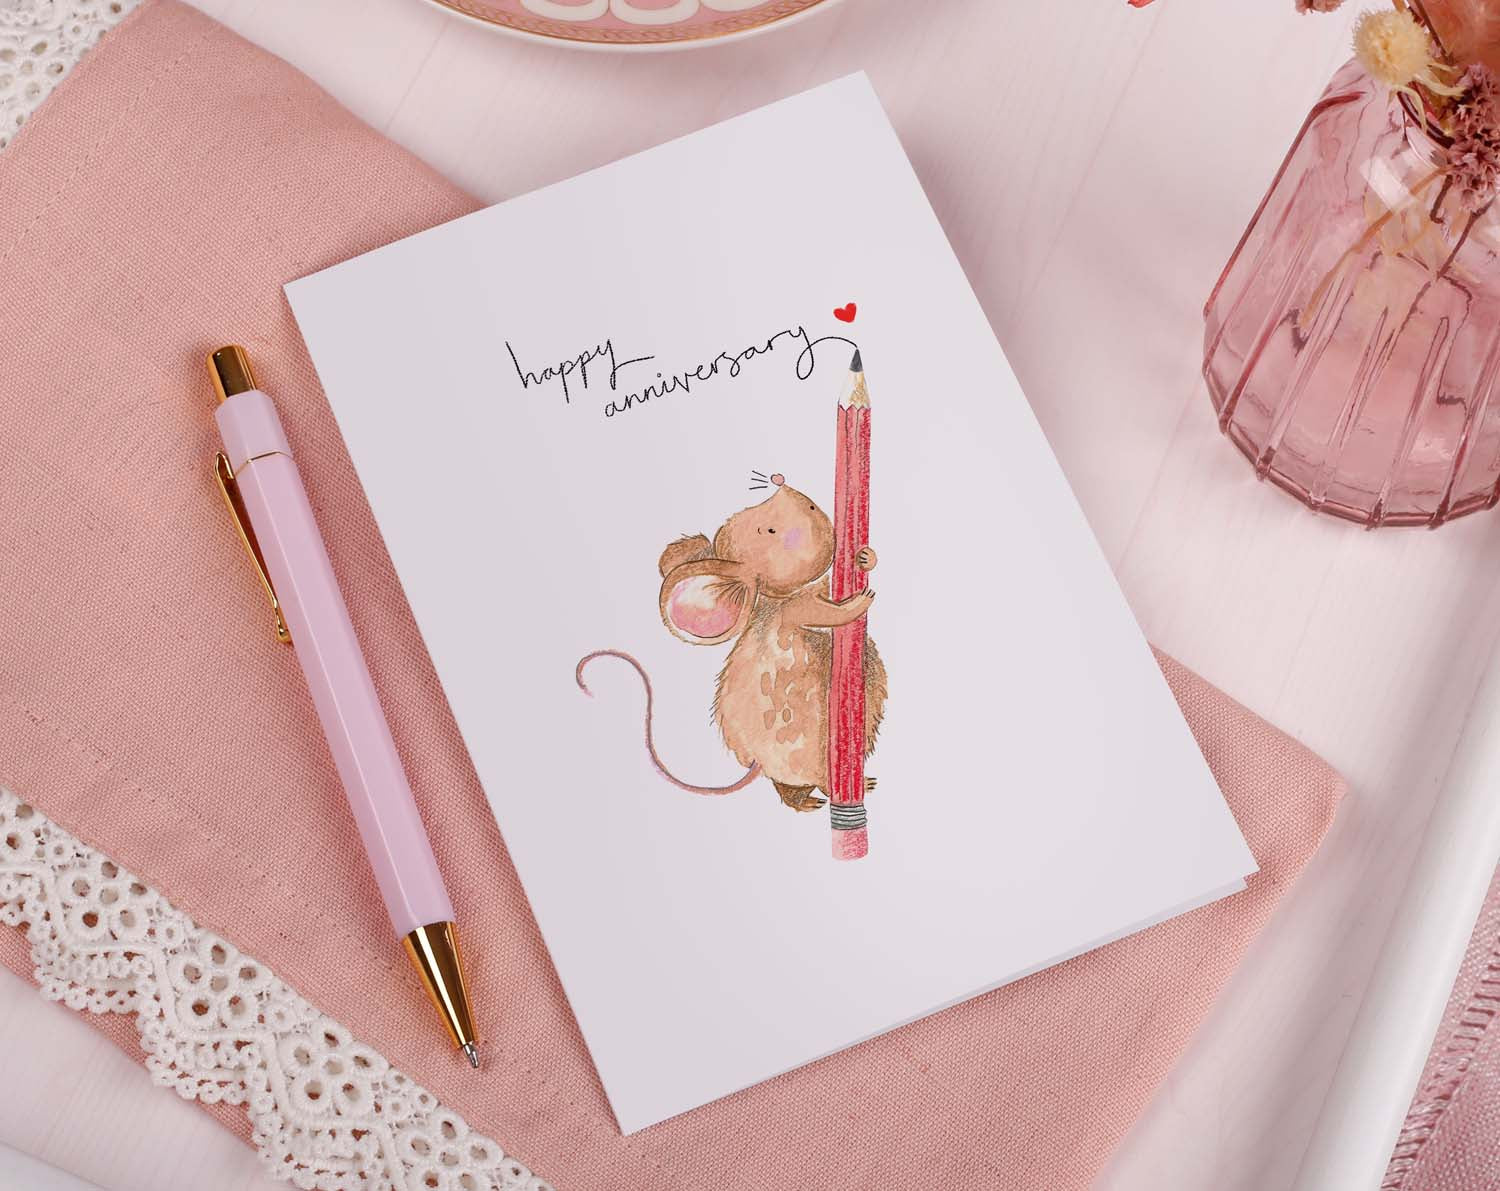 sentimental Mouse Anniversary Card for your Partner